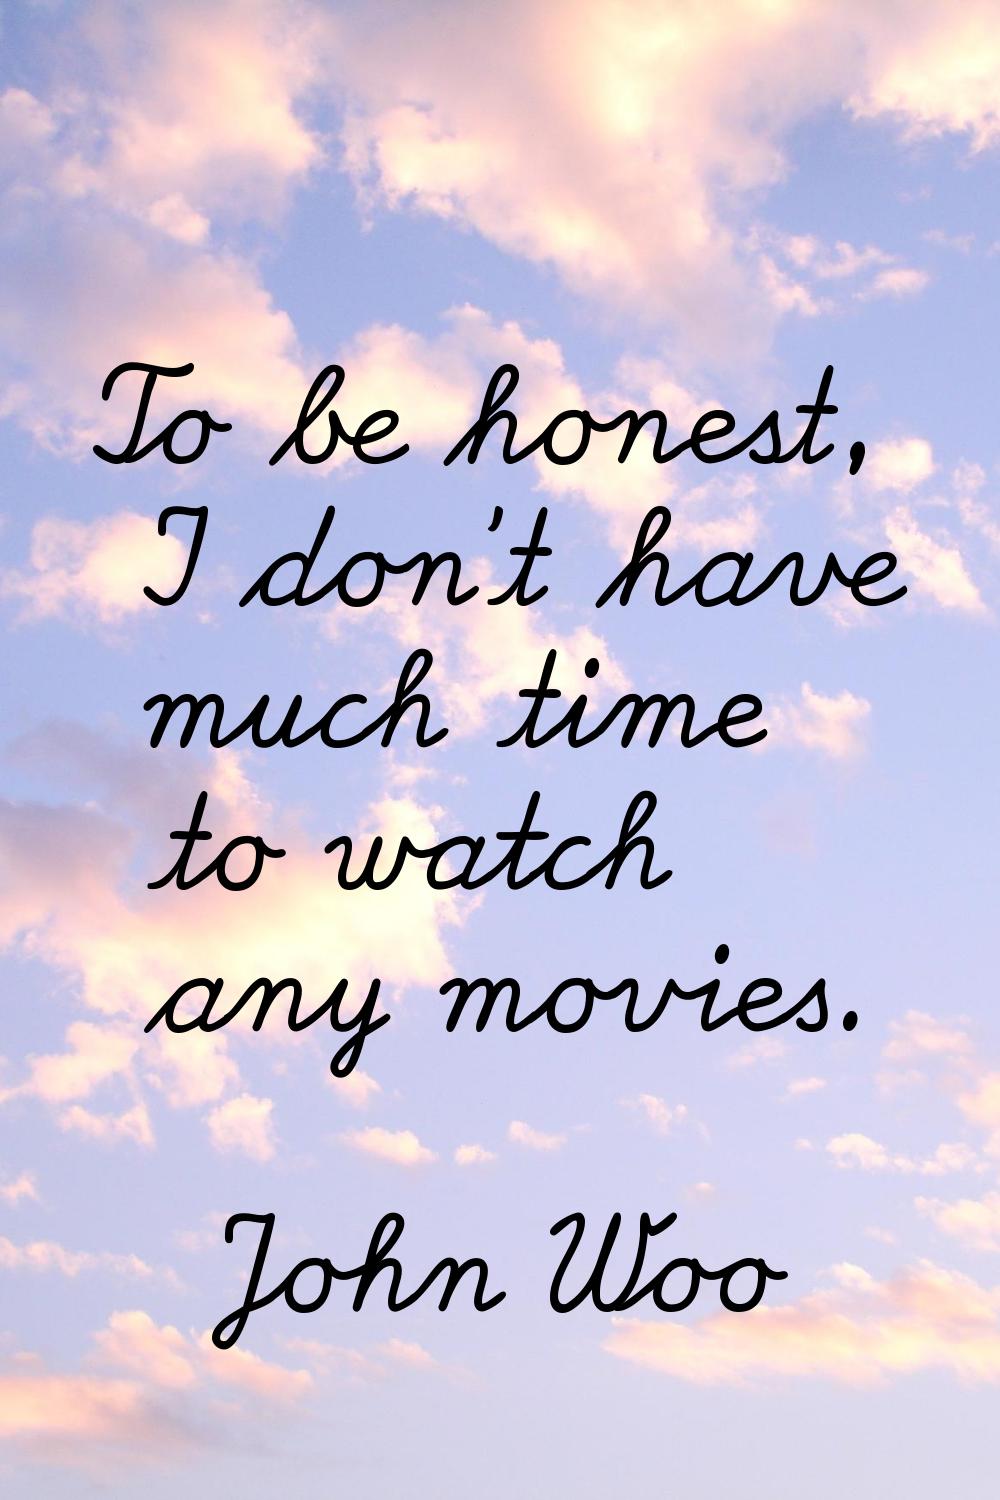 To be honest, I don't have much time to watch any movies.